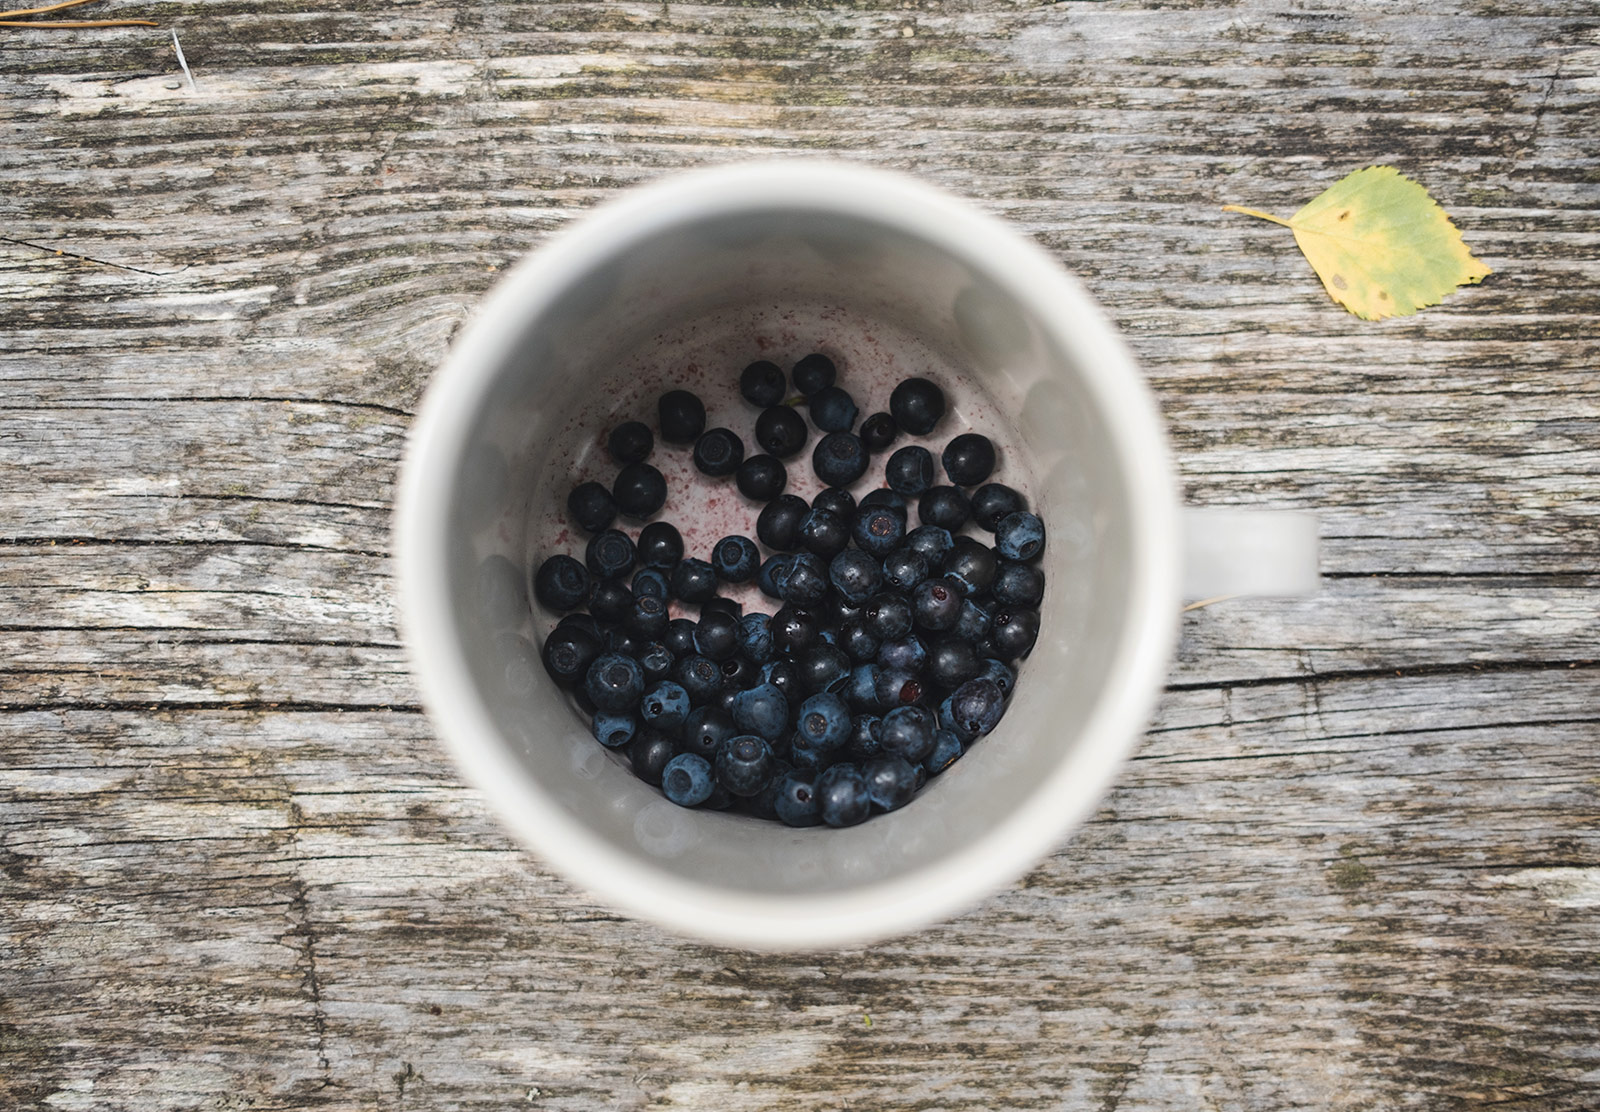 Cup of blueberries